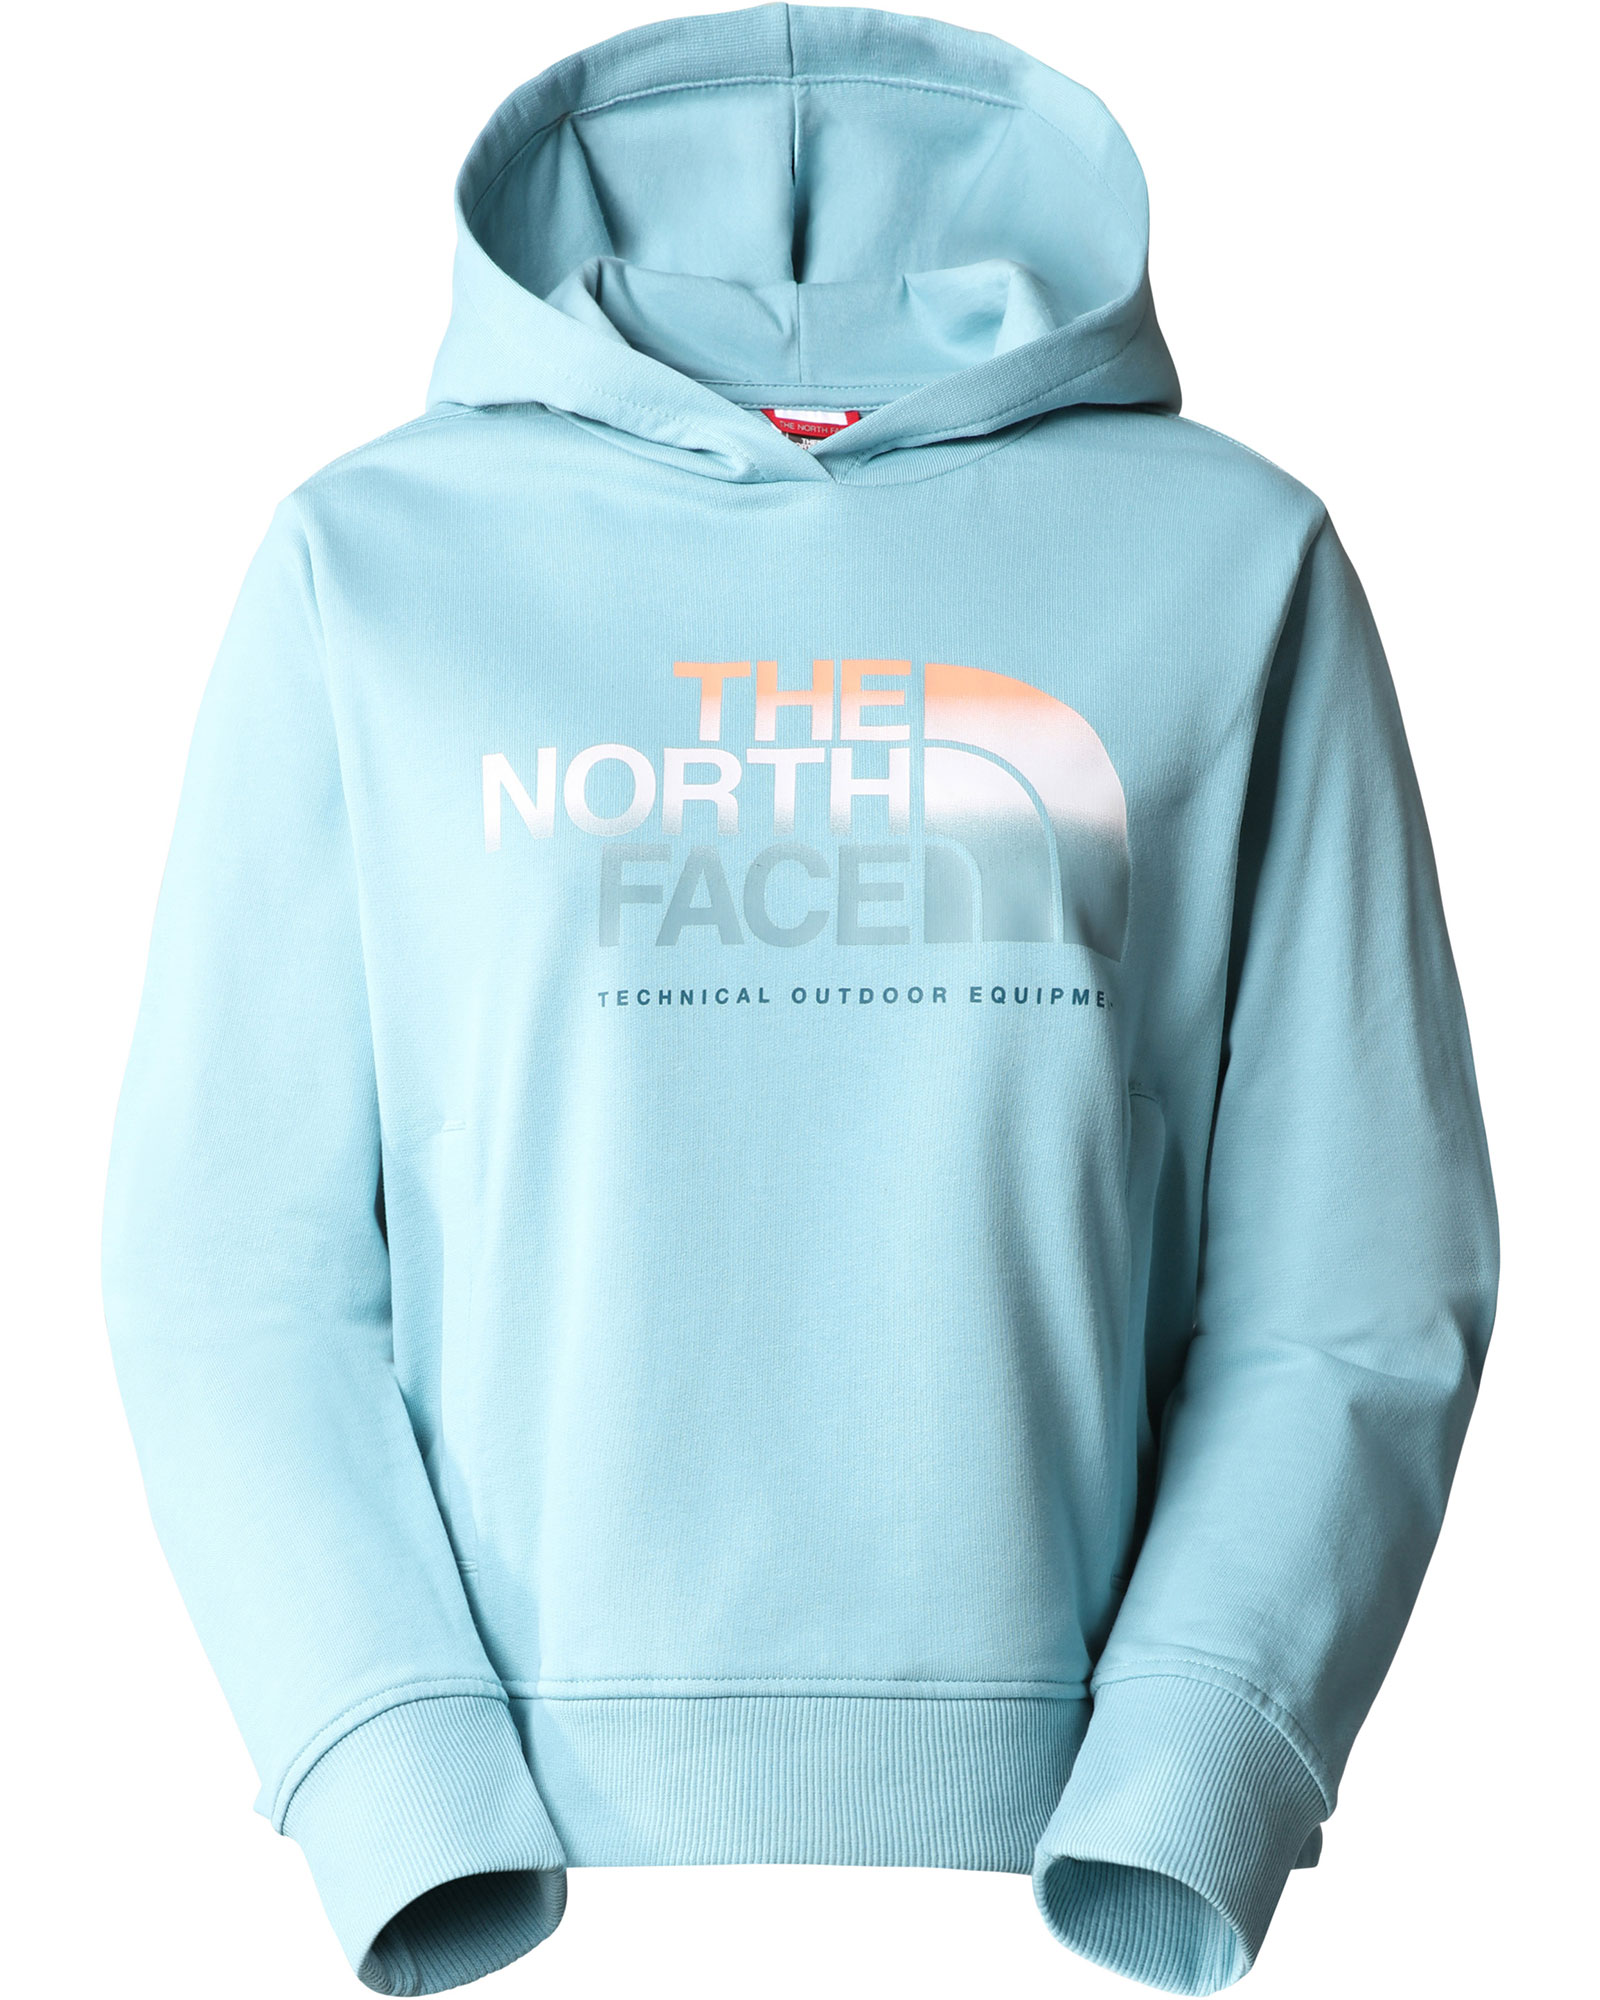 The North Face Women’s D2 Graphic Crop Hoodie - Reef Waters S